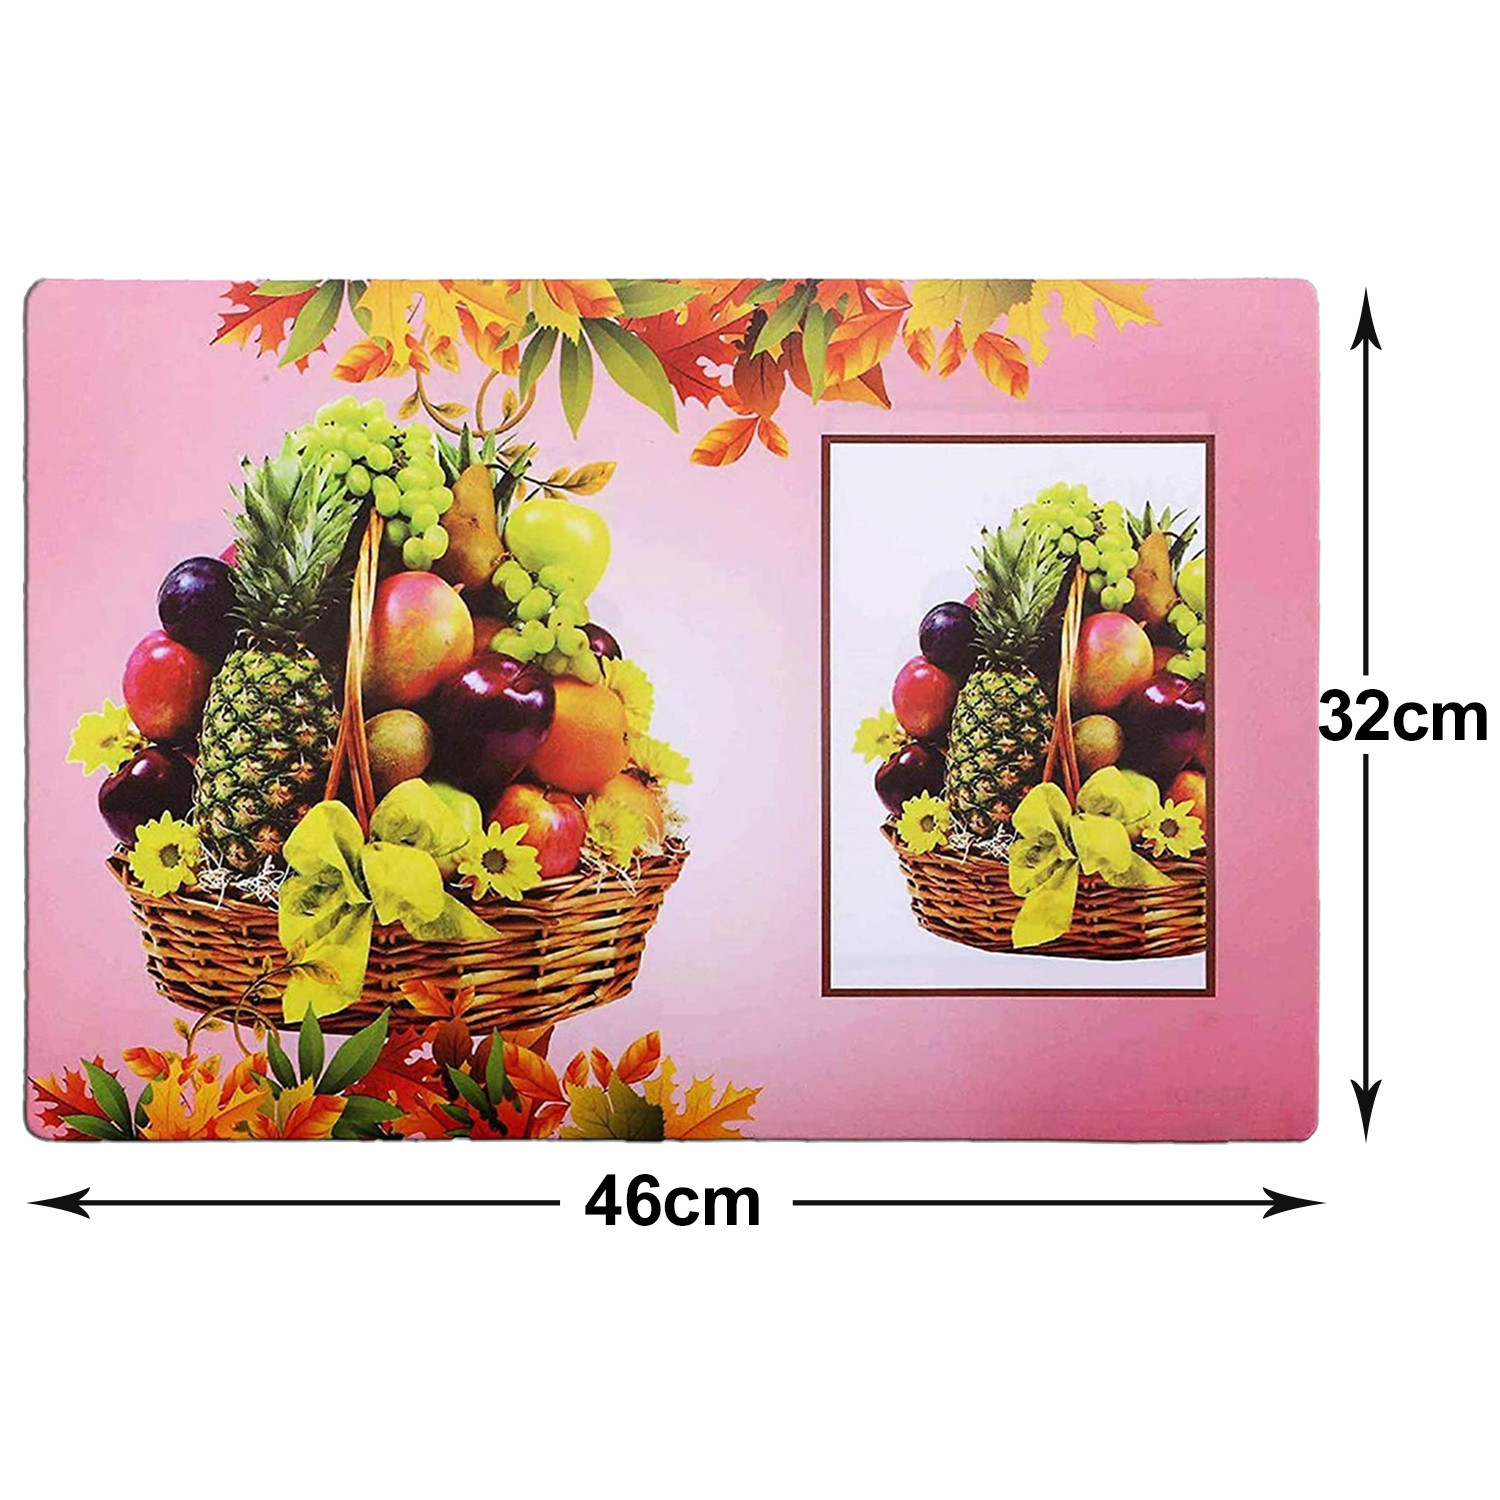 Kuber Industries Multiuses Fruit Print PVC Table Placemat for kitchen, Dining Table Set of 6 (Pink)